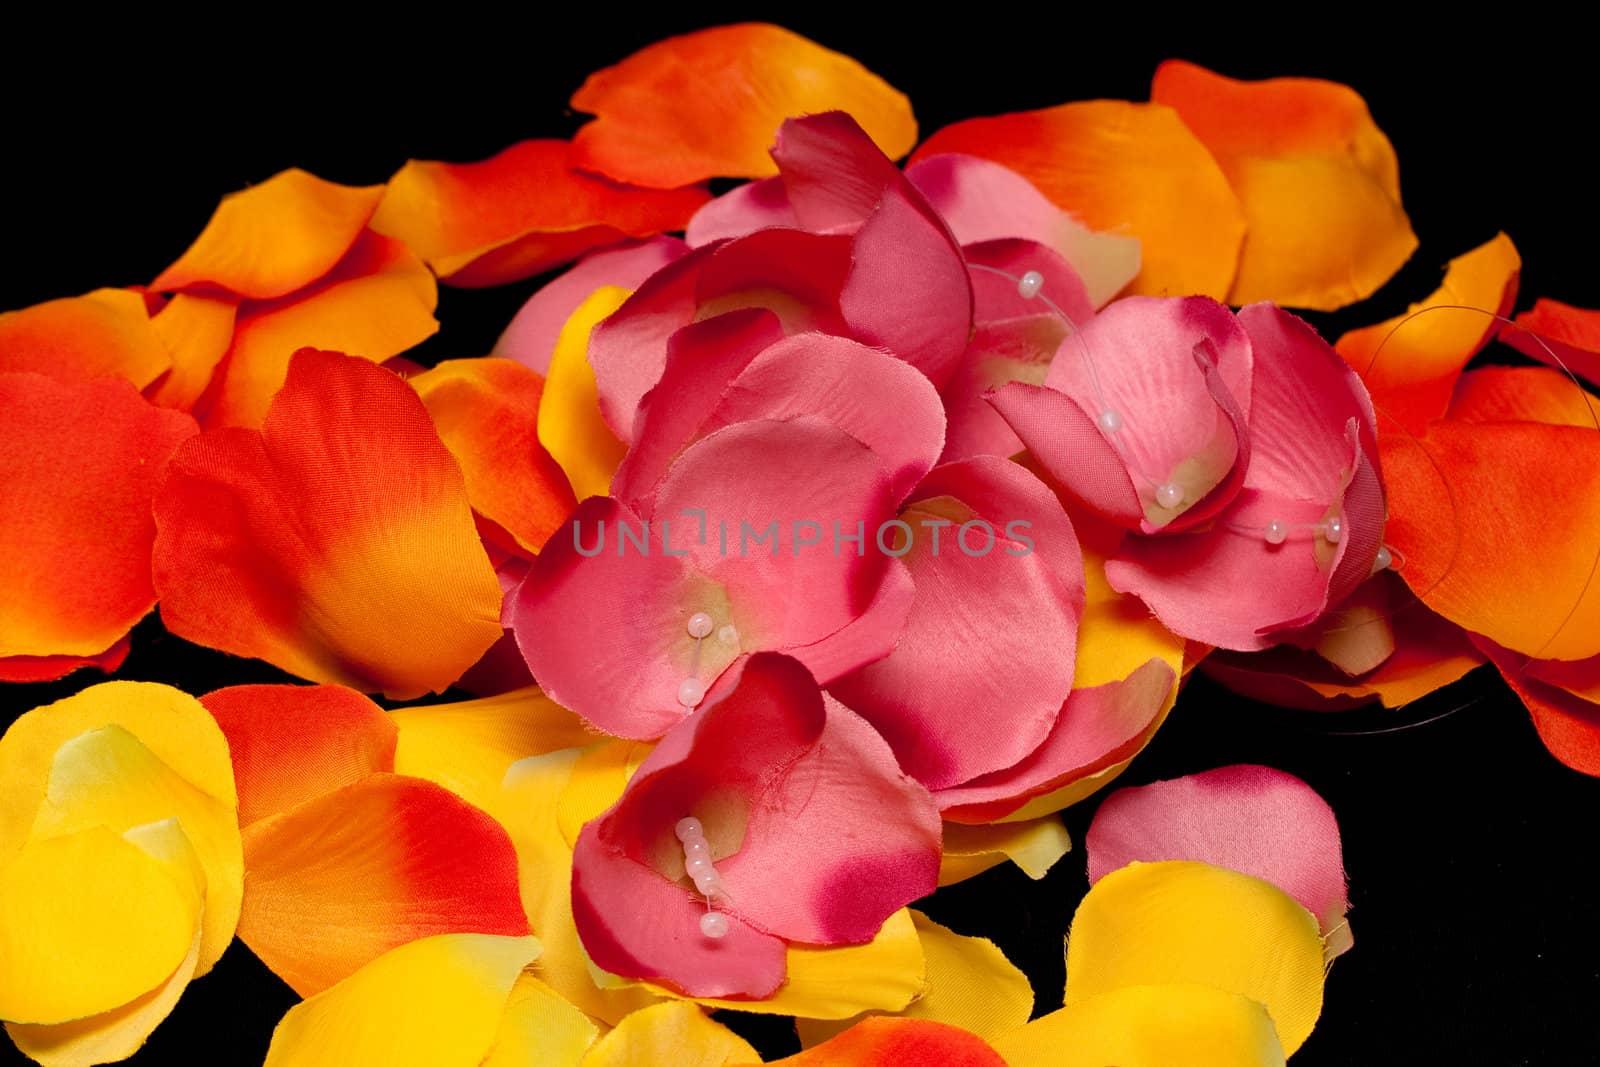 Orange, yellow and pink rose textile petals by foaloce